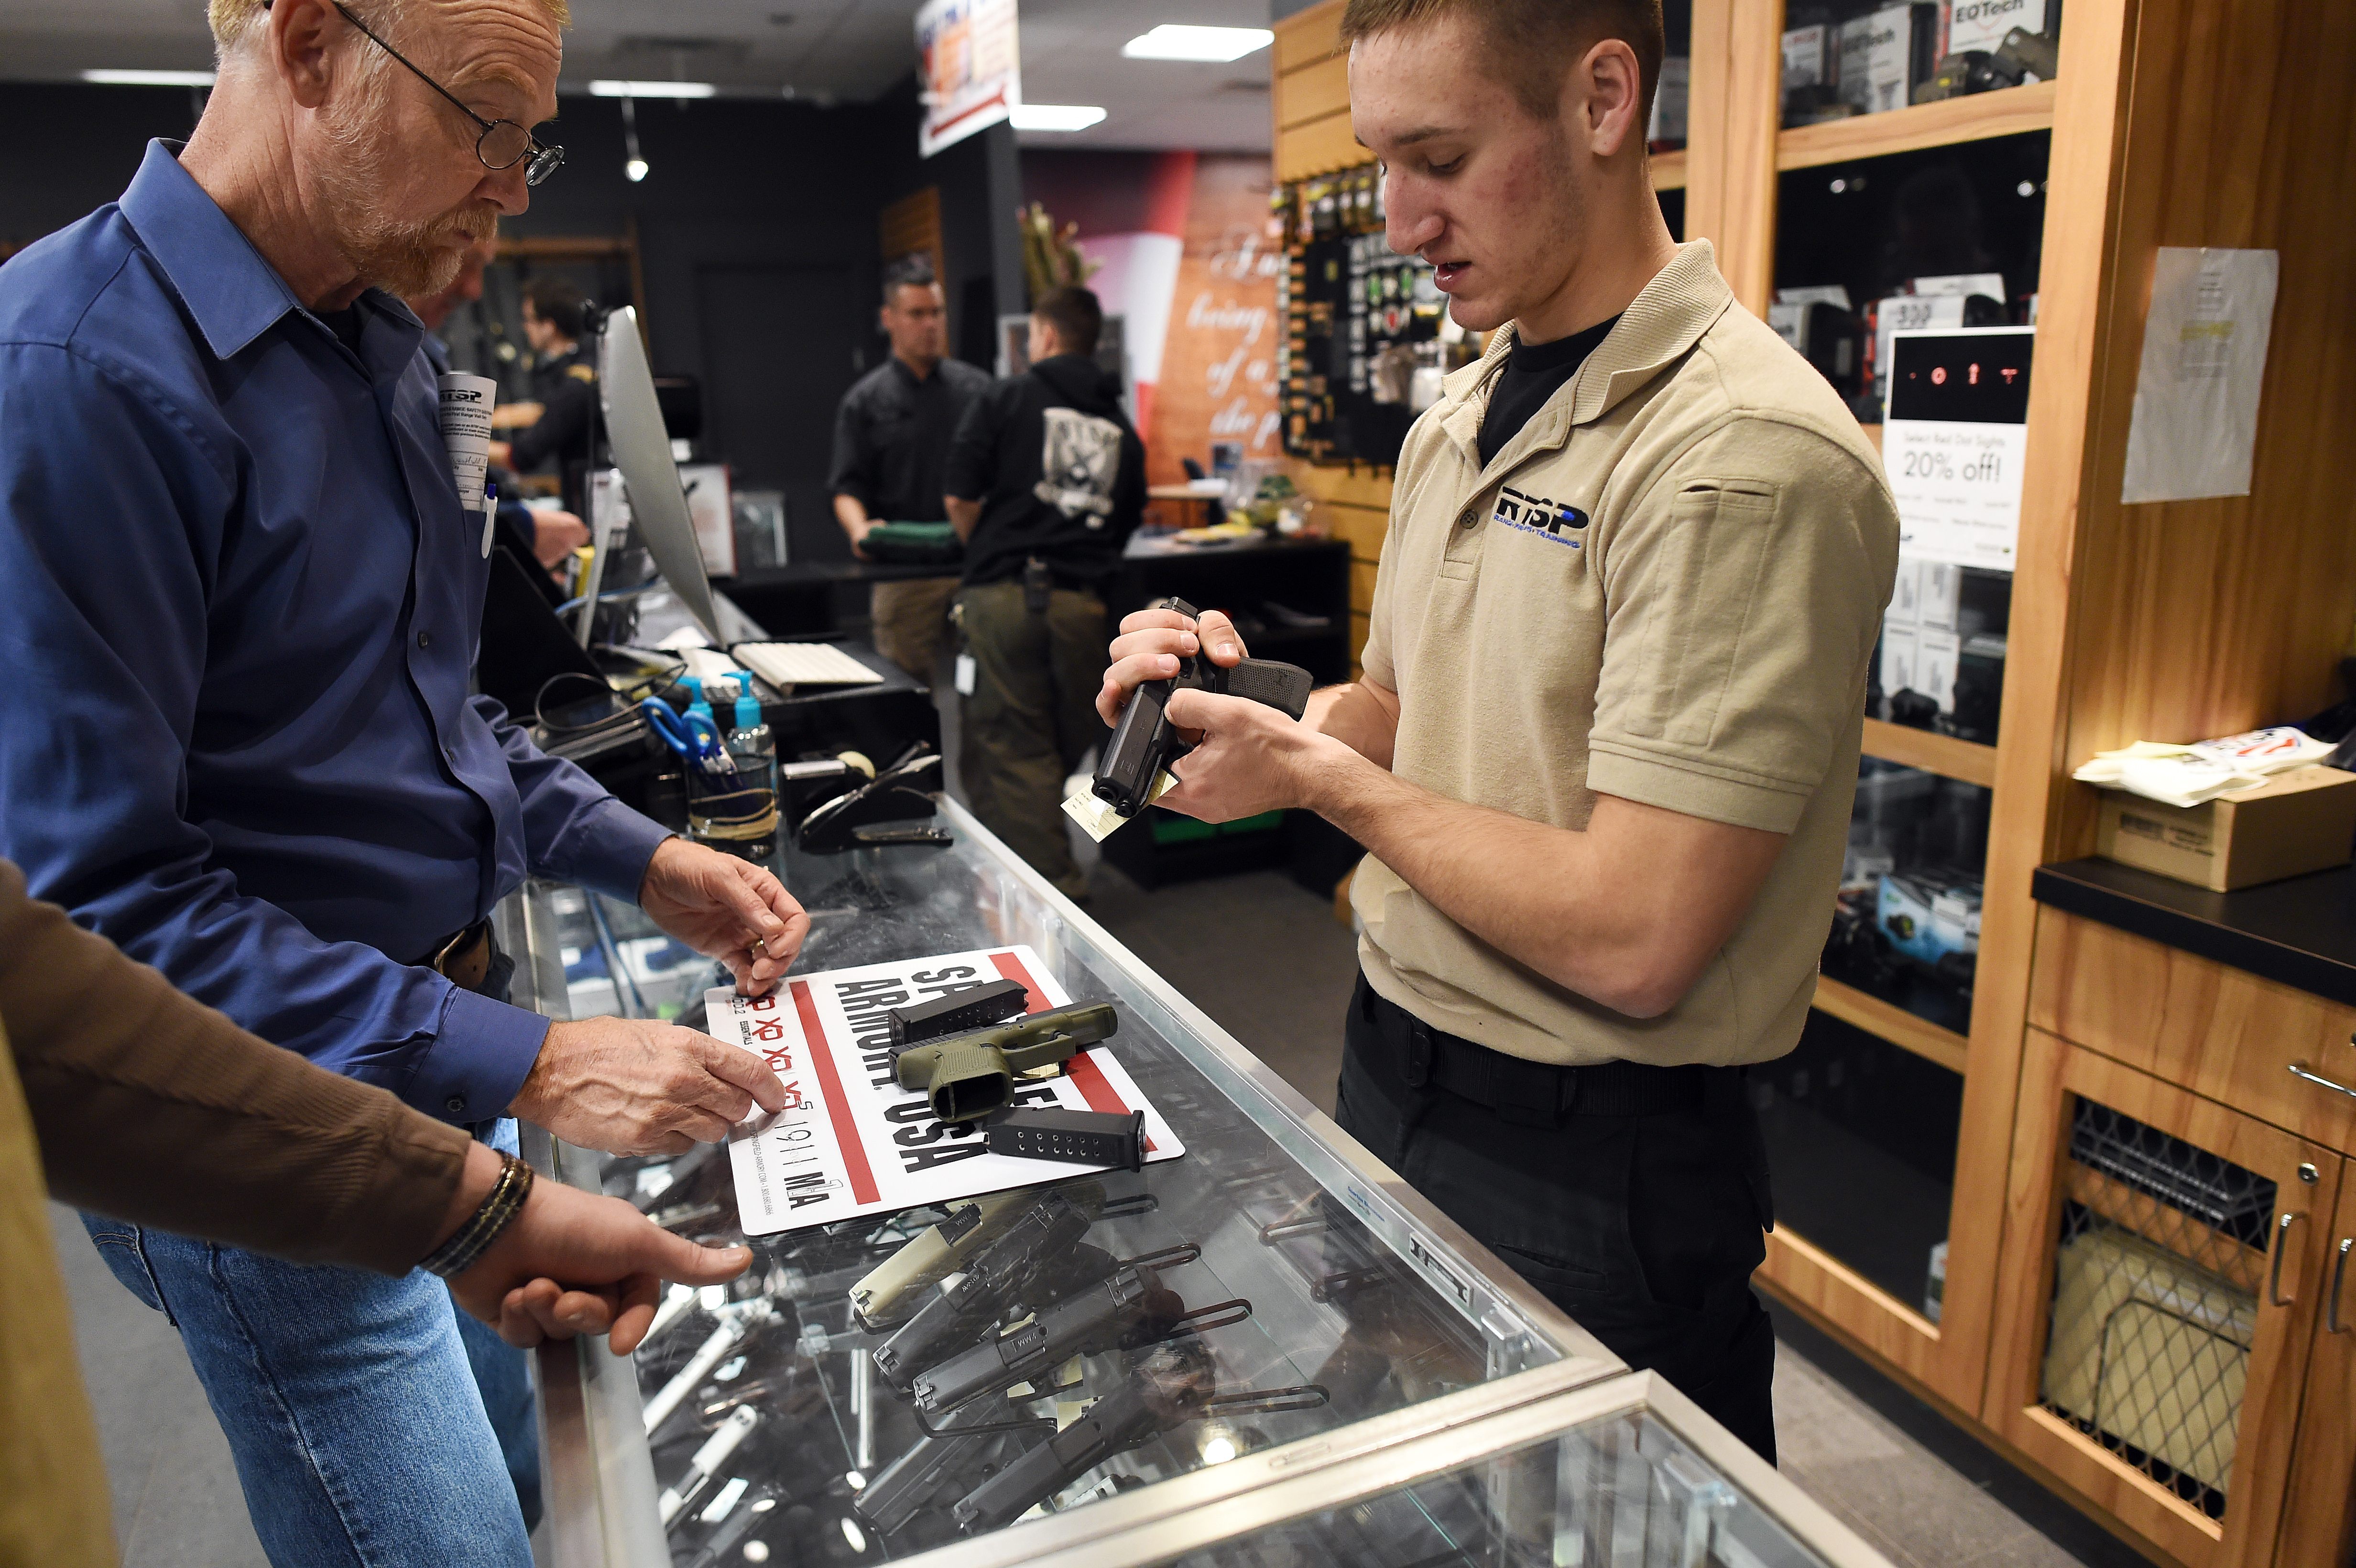 An employee shows handguns to customers at the RTSP shooting range in Randolph, New Jersey on December 9, 2015. (Photo by JEWEL SAMAD/AFP/Getty Images)